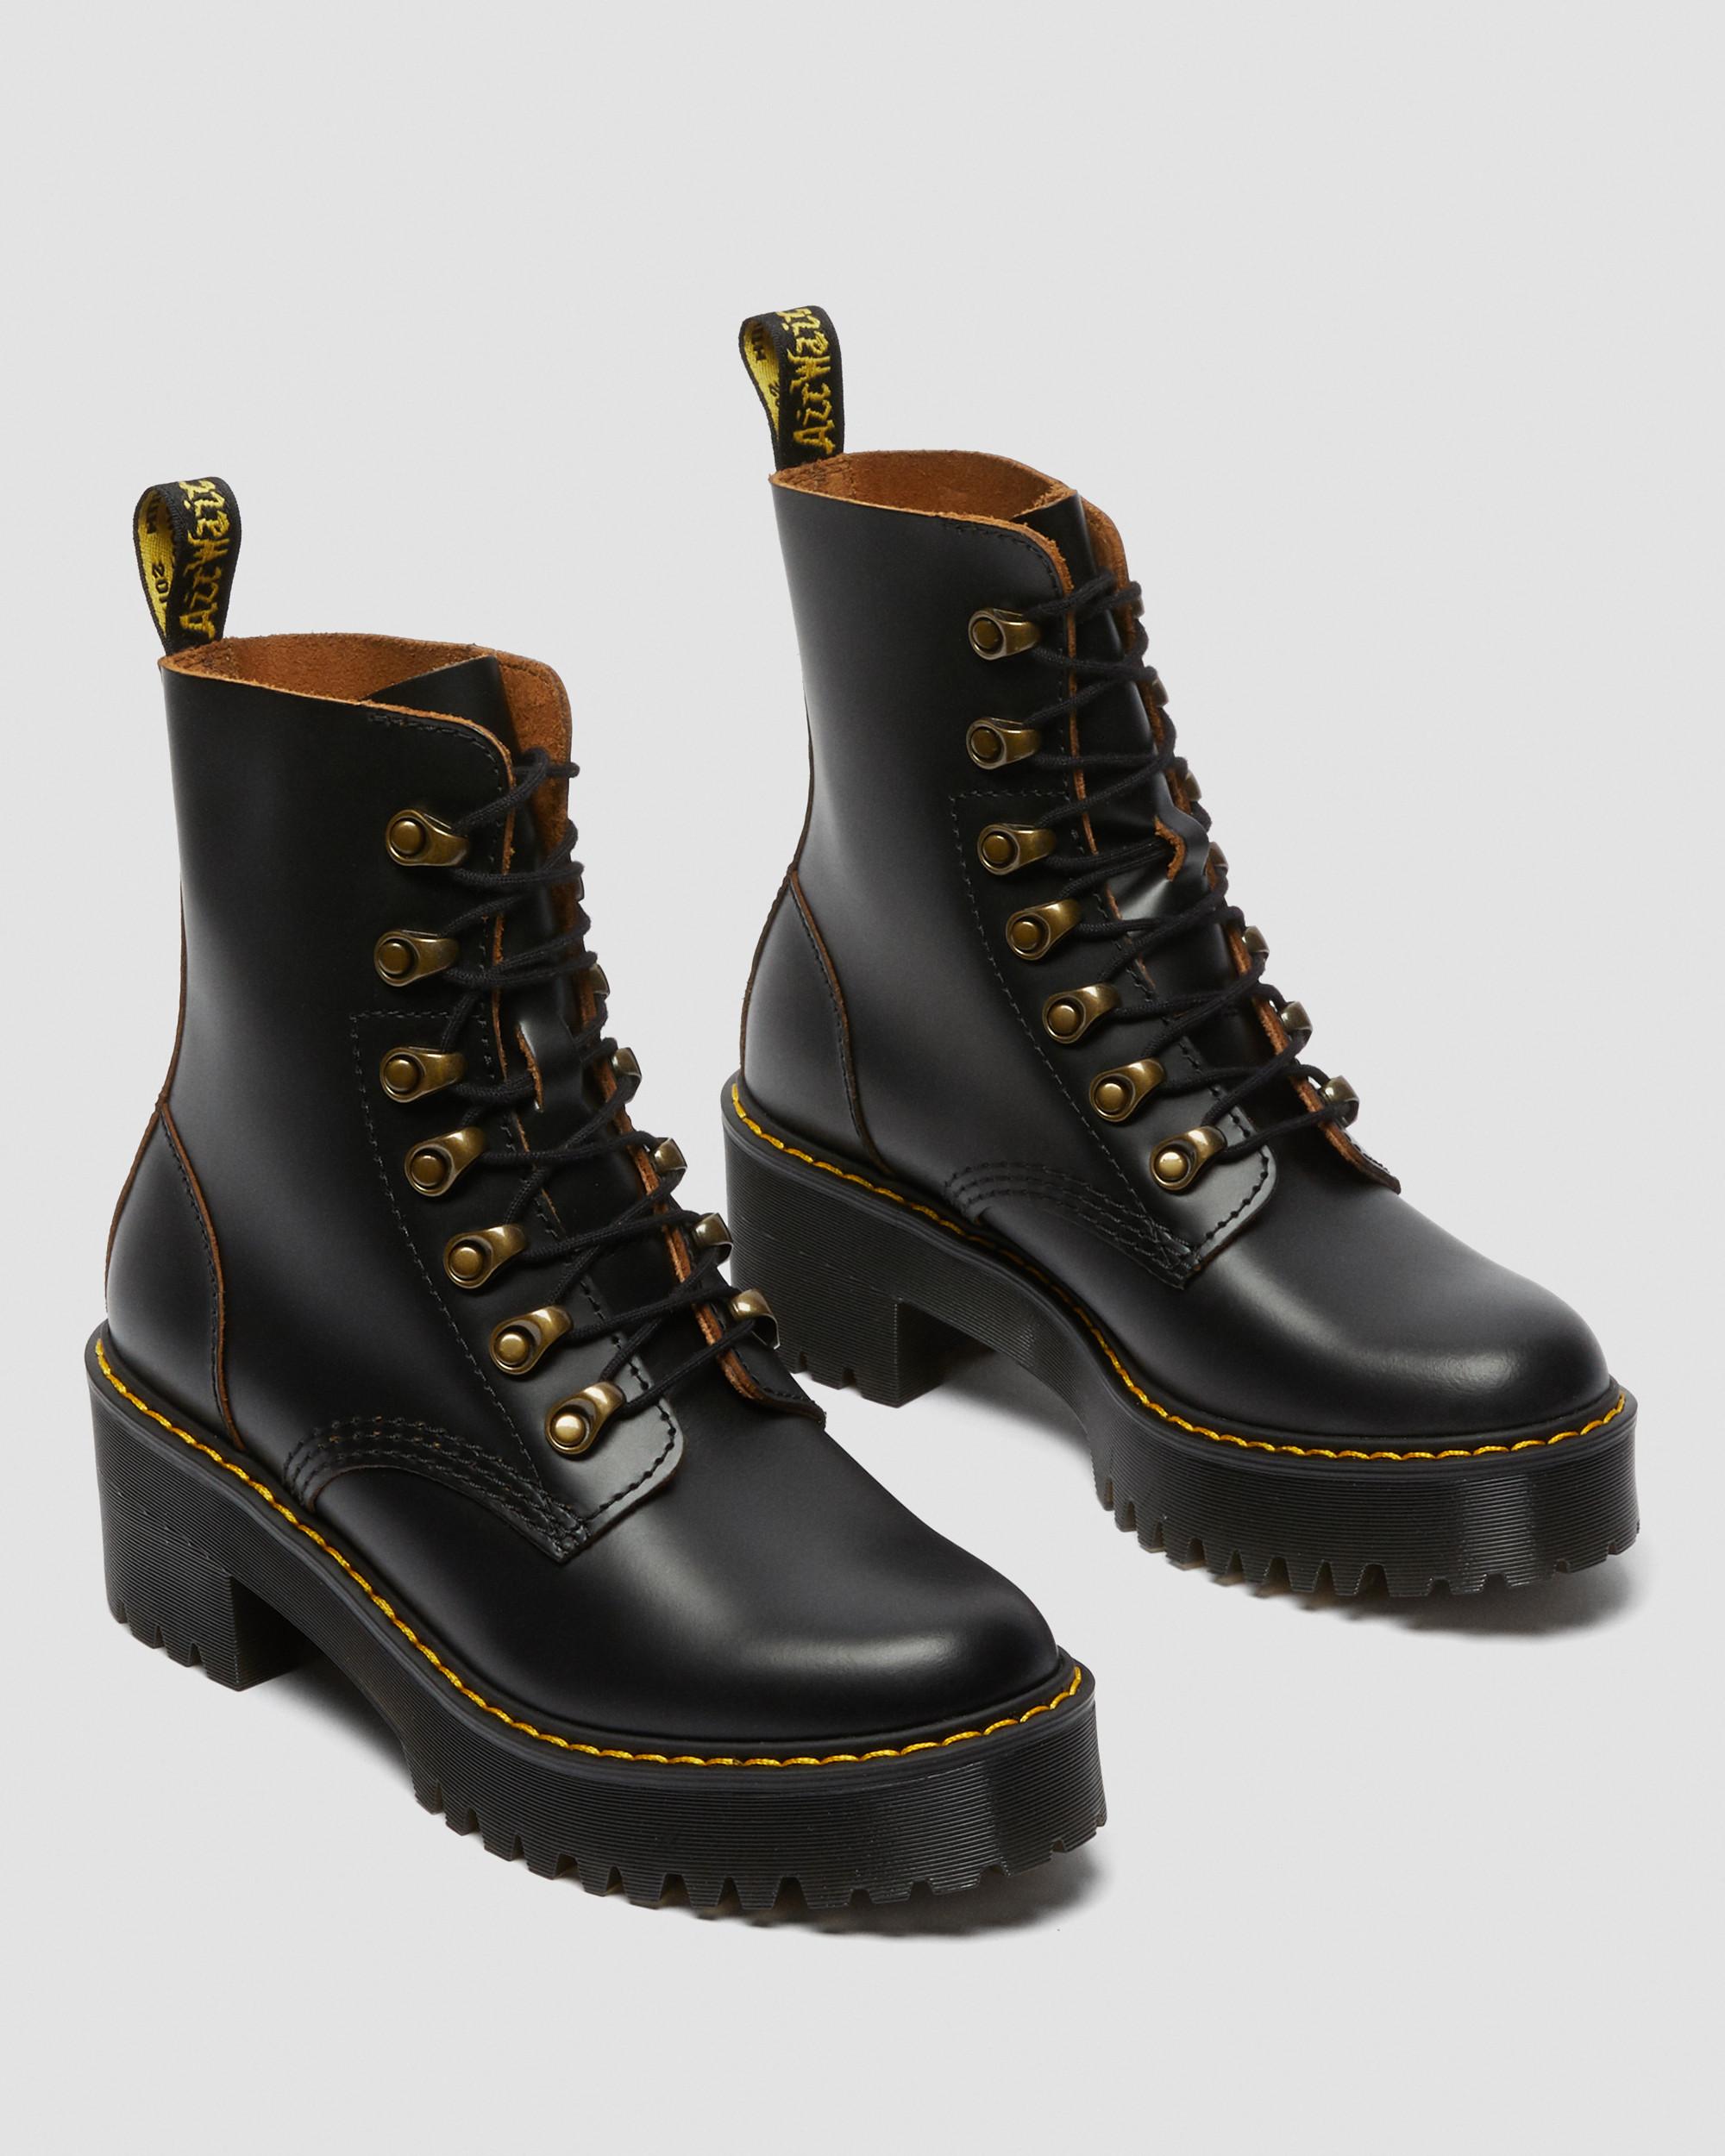 DR MARTENS Leona Women's Vintage Smooth Leather Heeled Boots